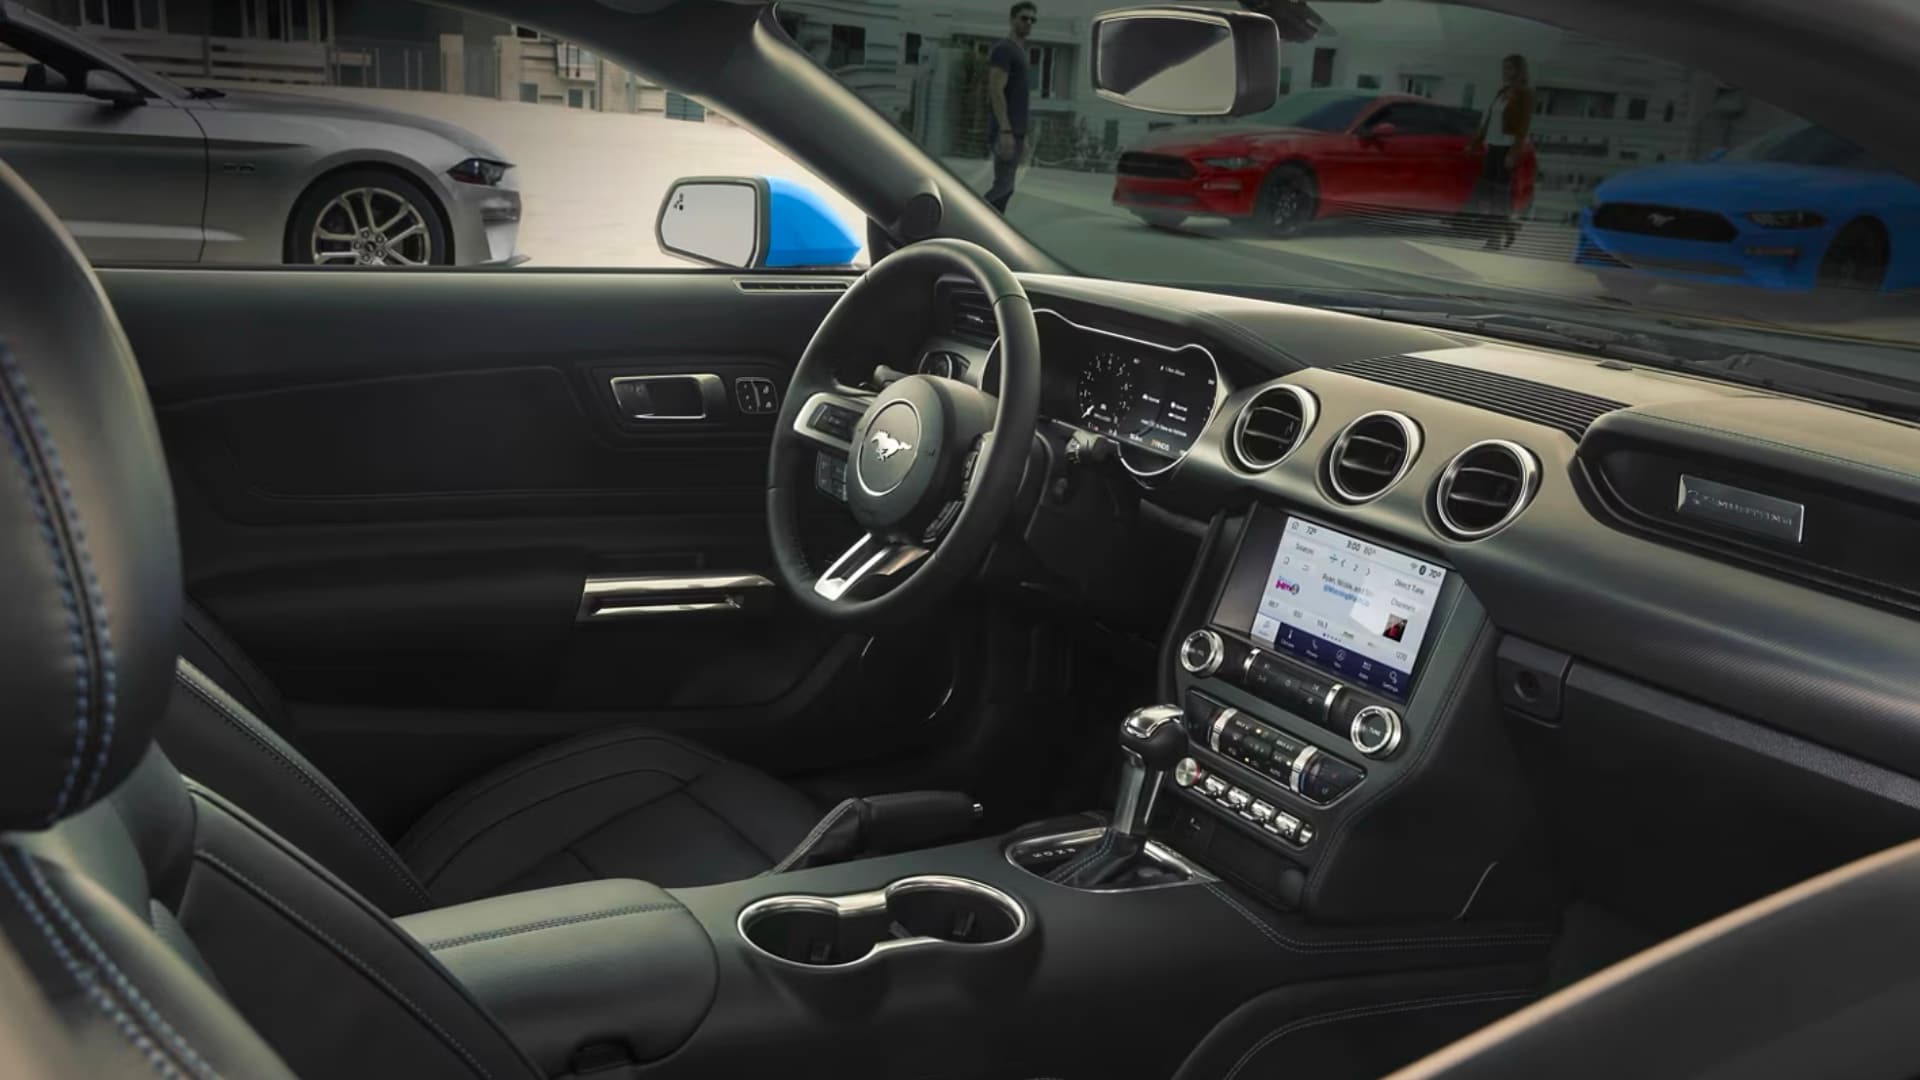 Interior of a Ford Mustang with the touch screen display active